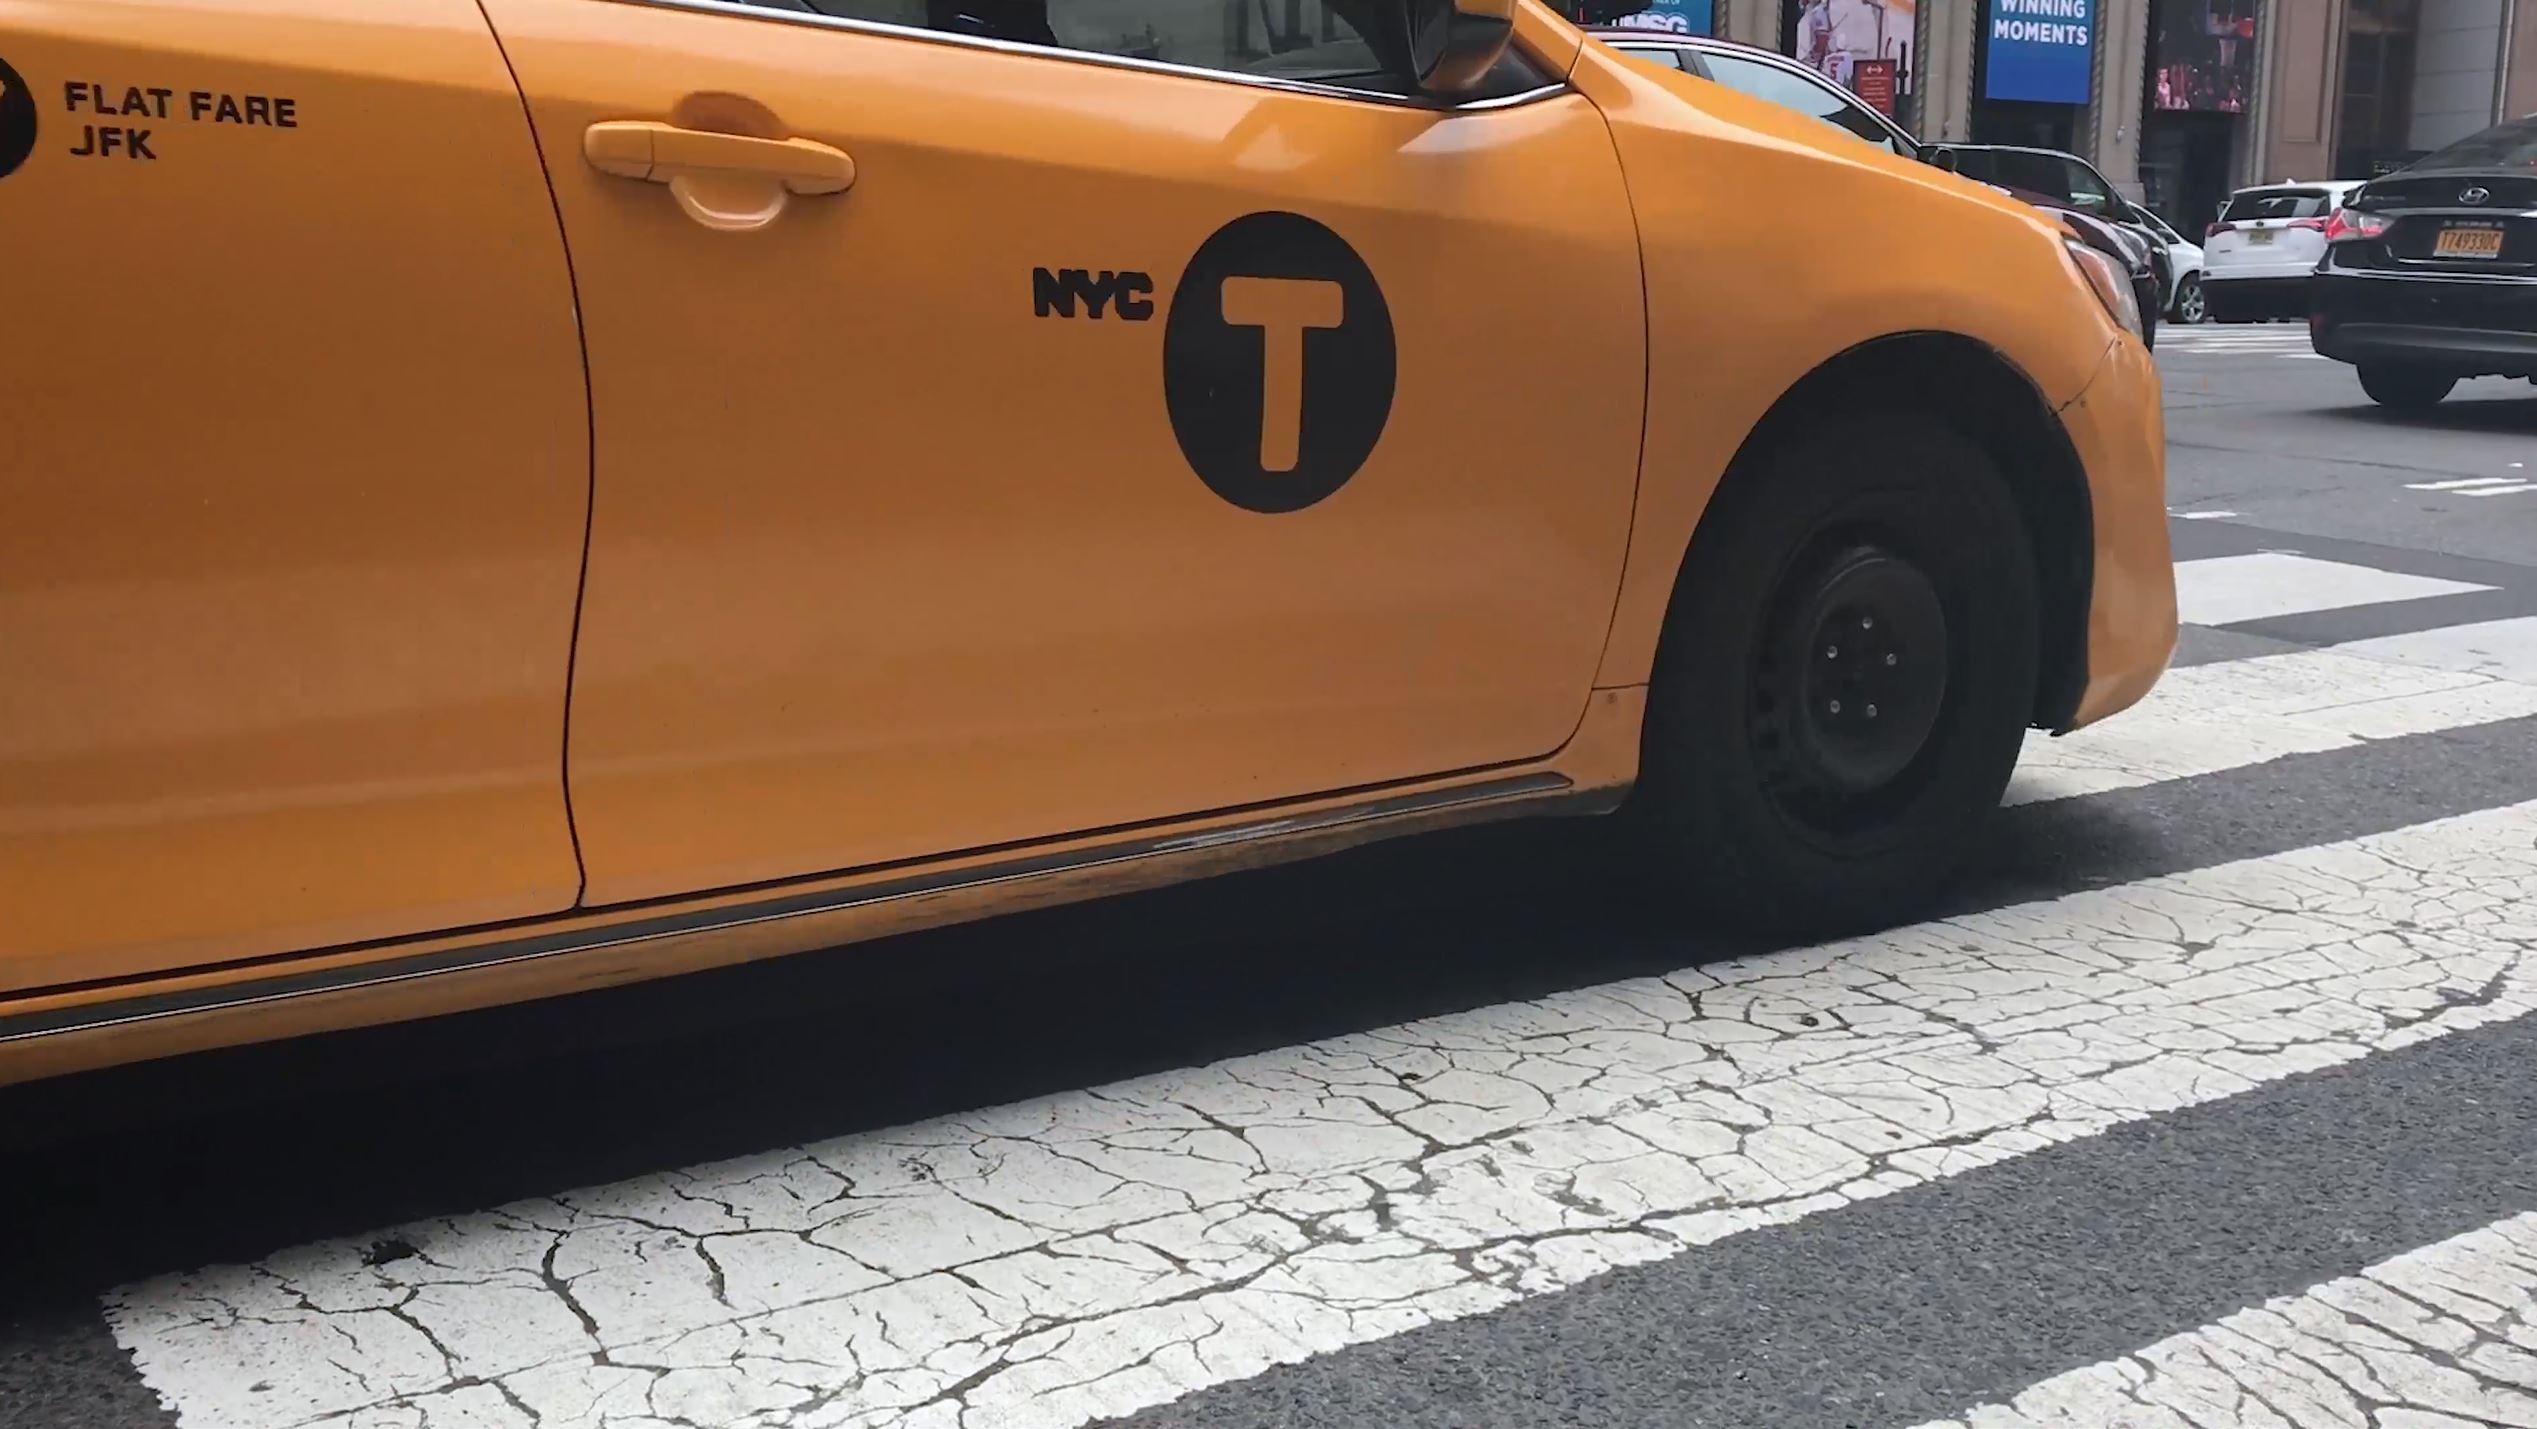 25 Things You Need to Know About the NYC Subway cabs